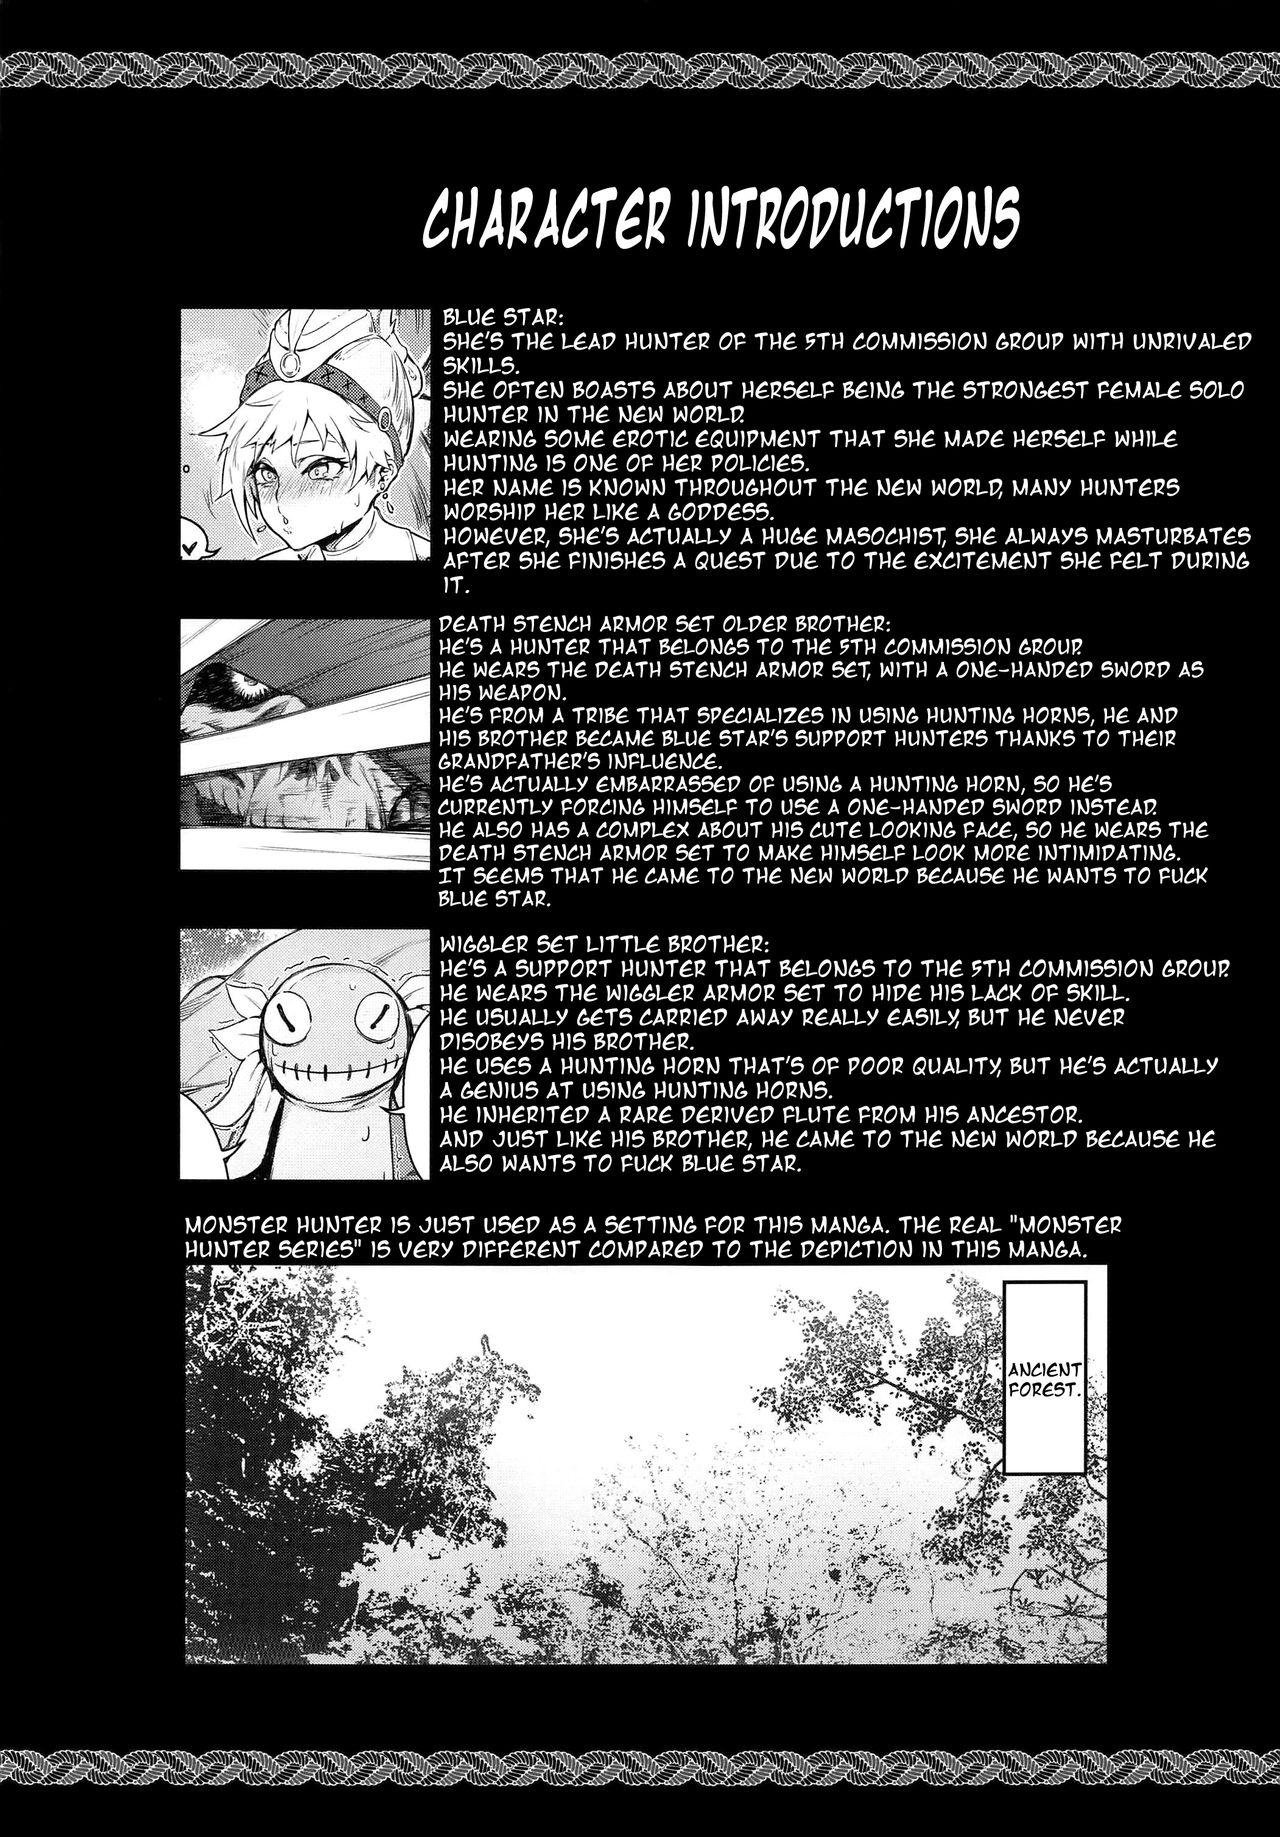 Trans Extreme Anal Hunter - Monster hunter 18 Porn - Page 3